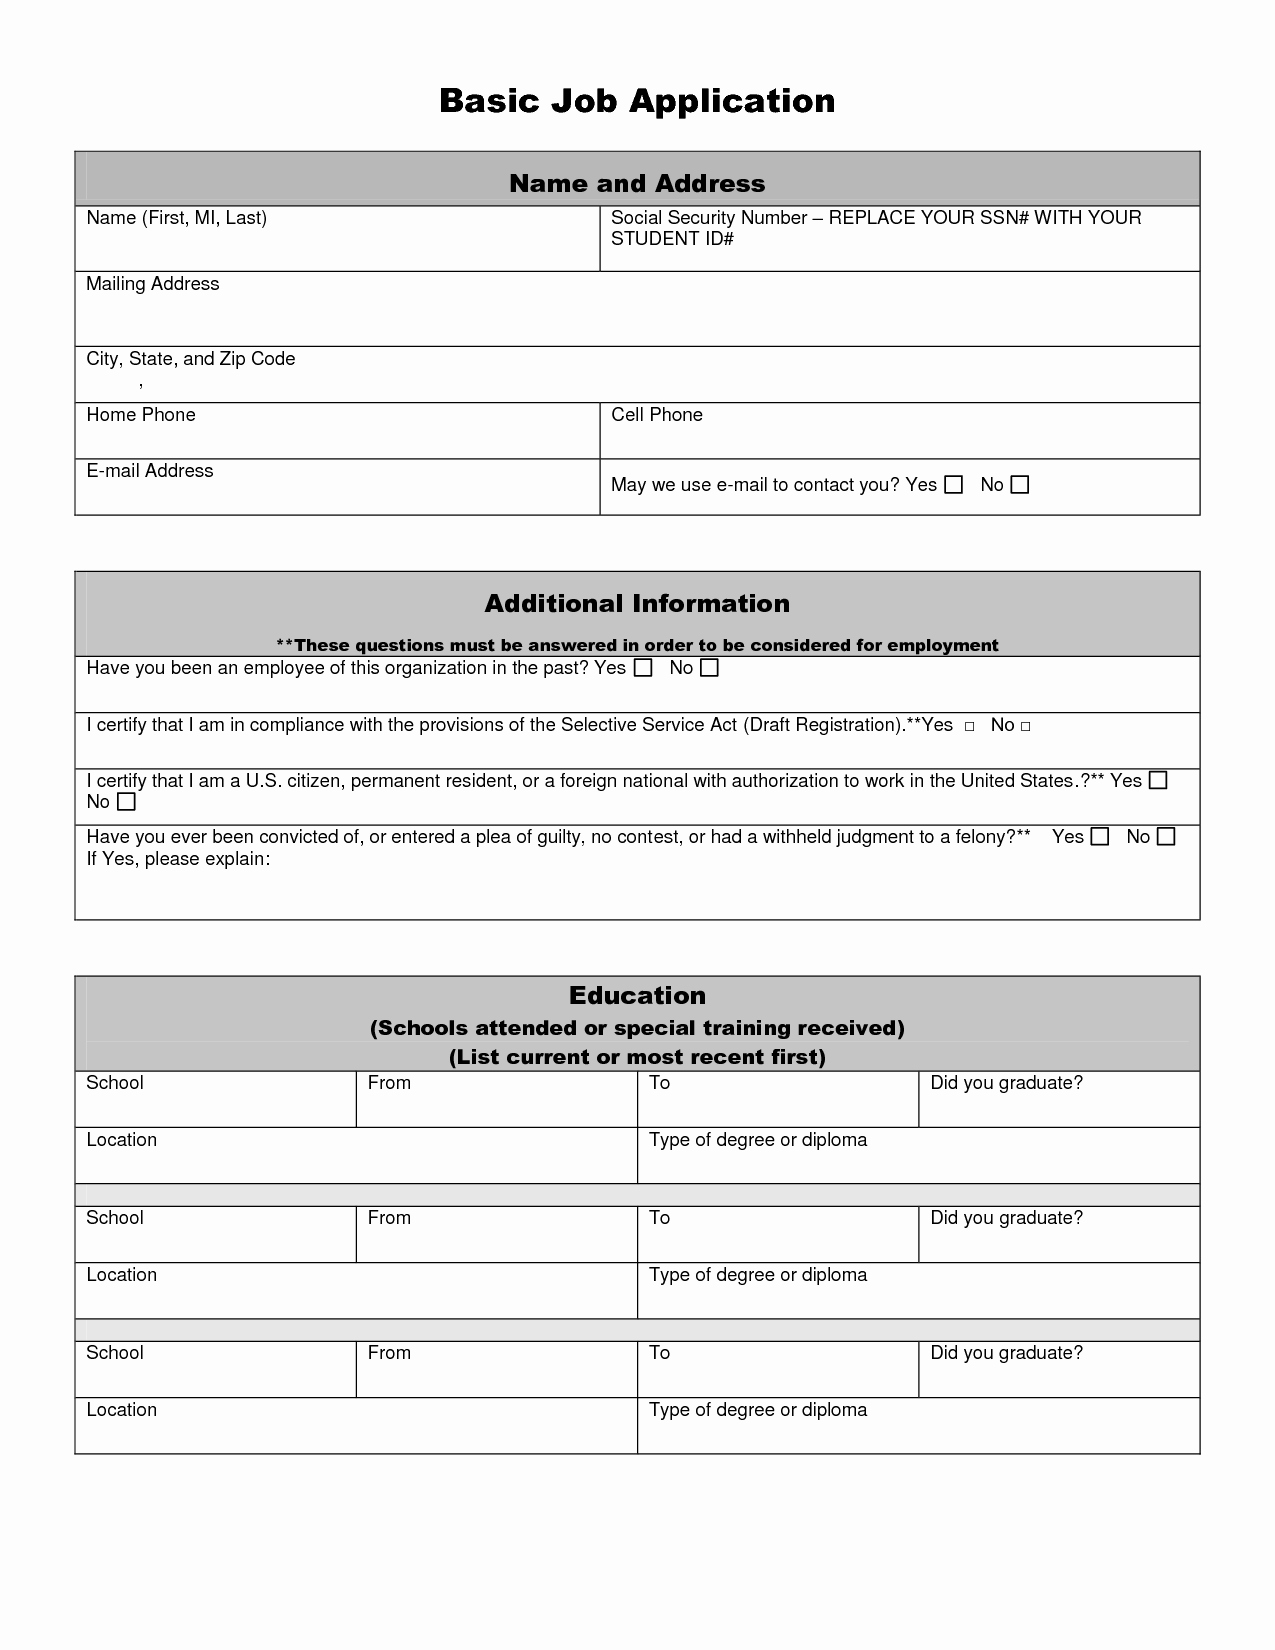 Simple Job Application Awesome Best S Of Basic Job Application Template Basic Job